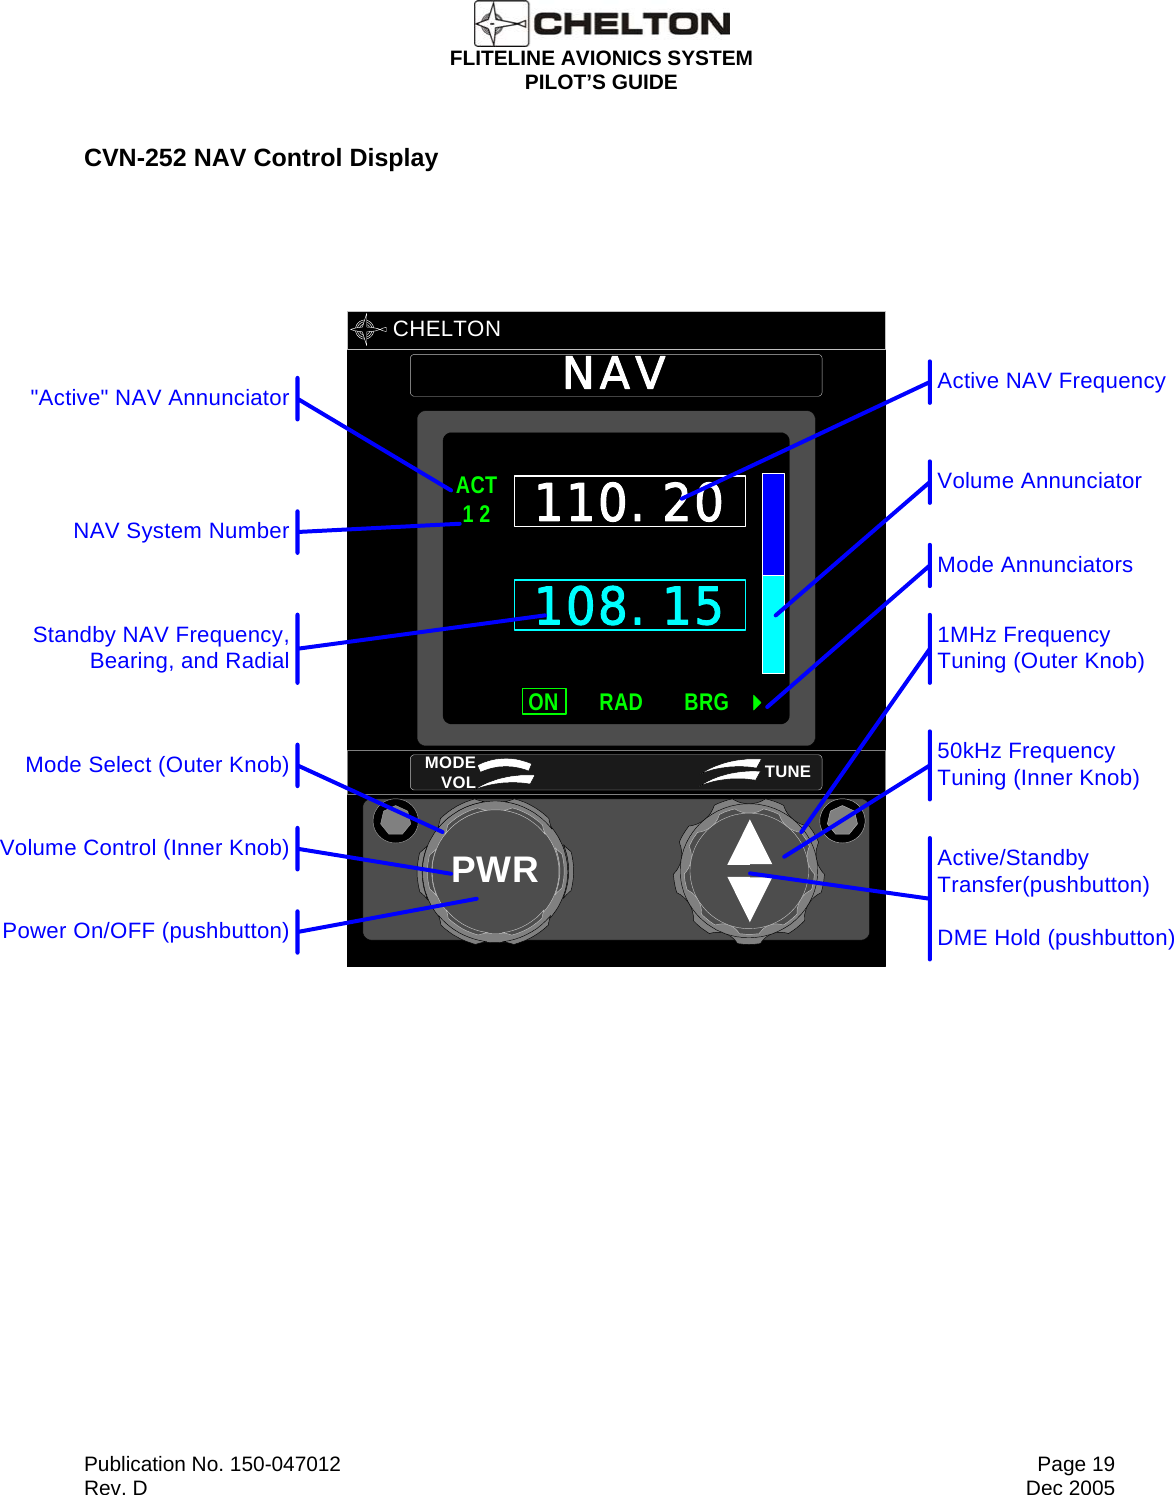  FLITELINE AVIONICS SYSTEM PILOT’S GUIDE  Publication No. 150-047012  Page 19 Rev. D  Dec 2005 CVN-252 NAV Control Display           CHELTON NAVPWR108.15ACT1 2ON BRGRAD 110.20MODE VOL TUNE 50kHz Frequency Tuning (Inner Knob)1MHz Frequency Tuning (Outer Knob)Active/Standby Transfer(pushbutton)DME Hold (pushbutton)Power On/OFF (pushbutton)Volume Control (Inner Knob)Mode Select (Outer Knob)Volume AnnunciatorMode AnnunciatorsNAV System Number&quot;Active&quot; NAV AnnunciatorStandby NAV Frequency,Bearing, and Radial   Active NAV Frequency